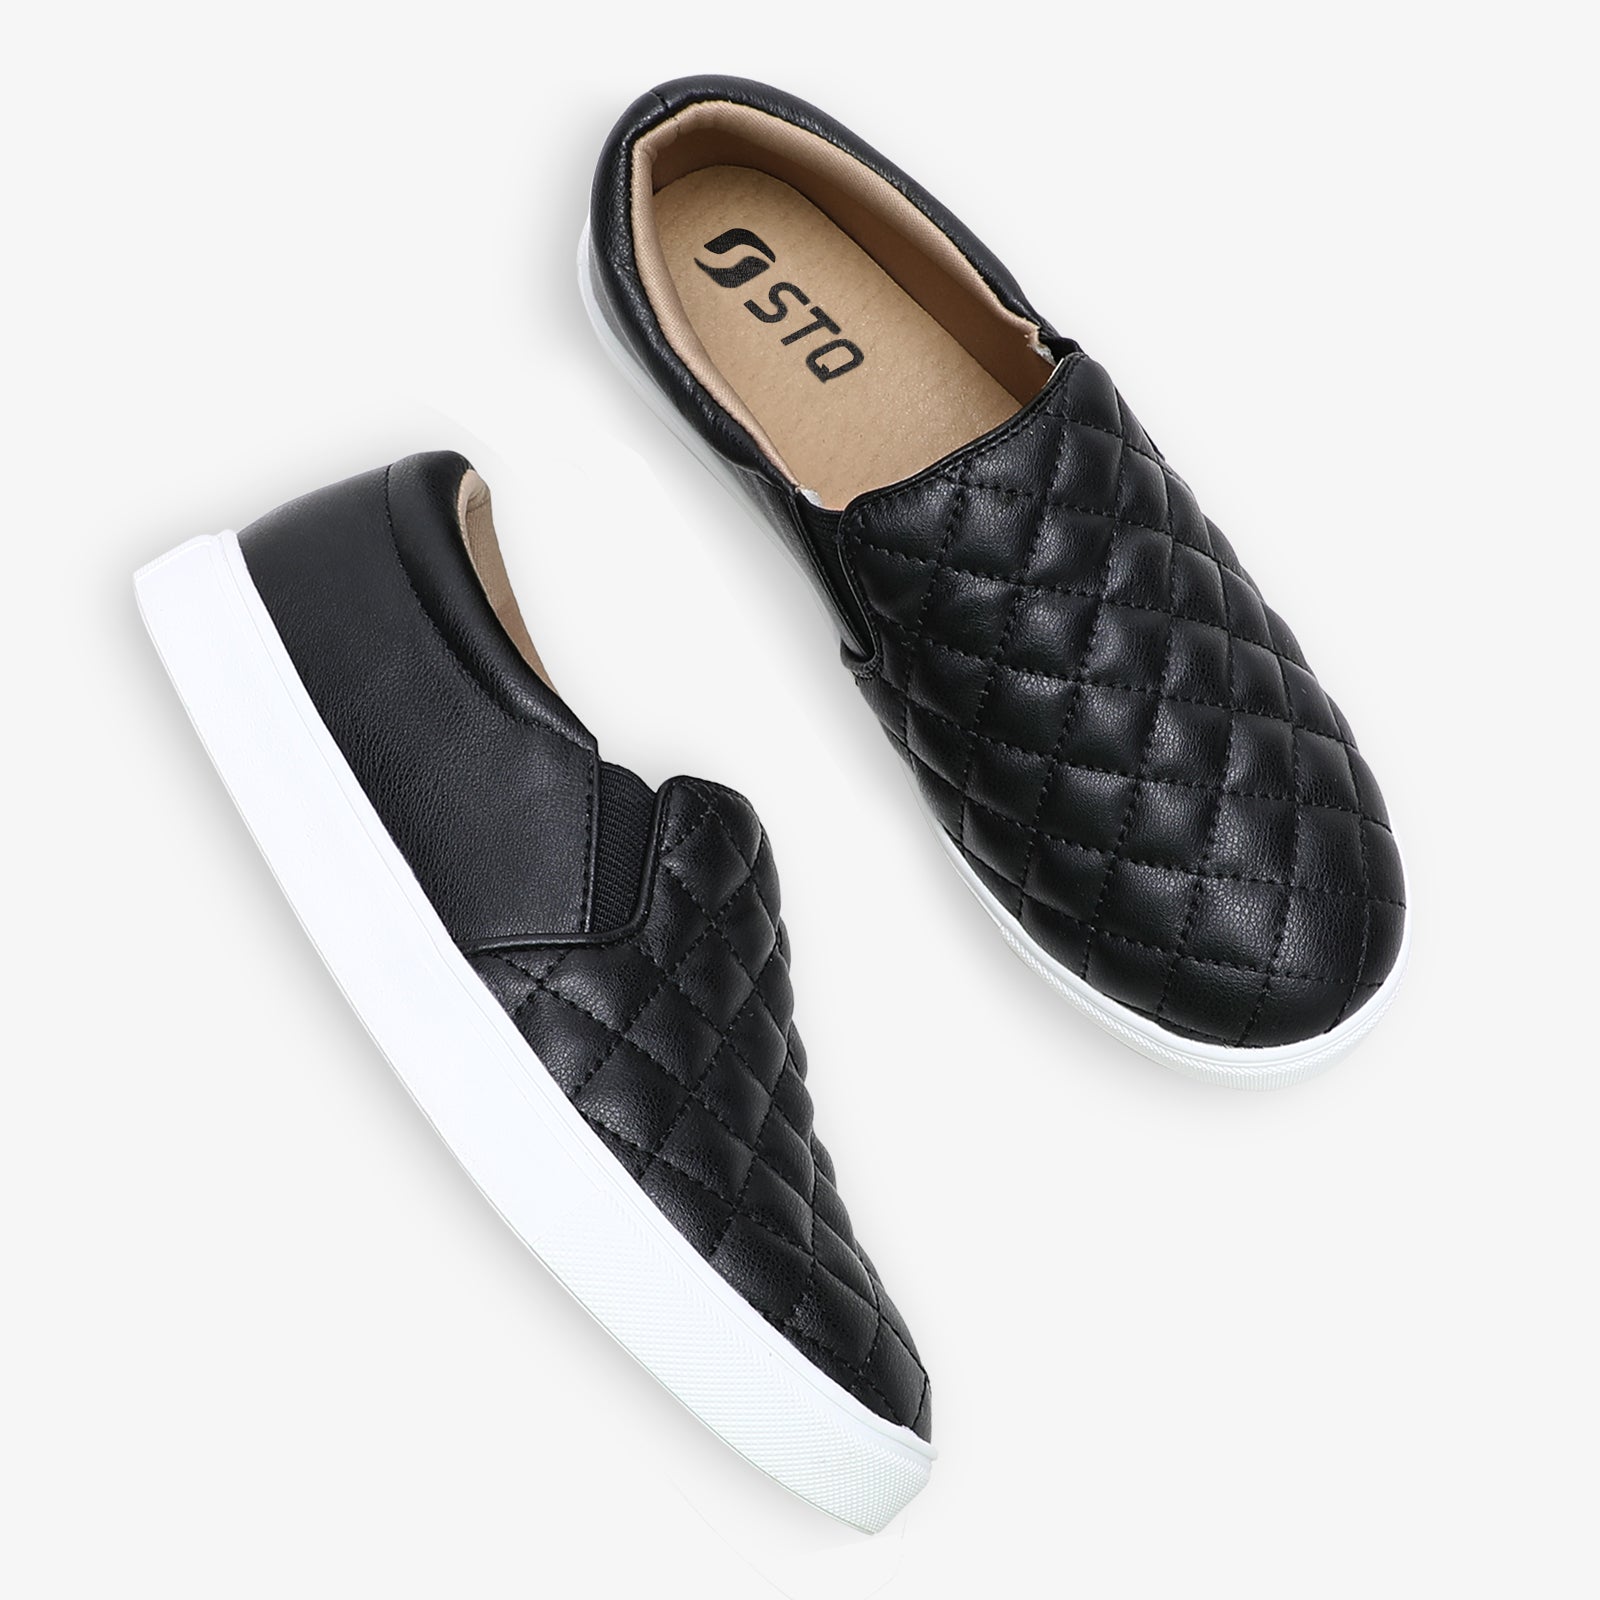 The 20 Best Slip-On Shoes for Women of 2023, According to Testers